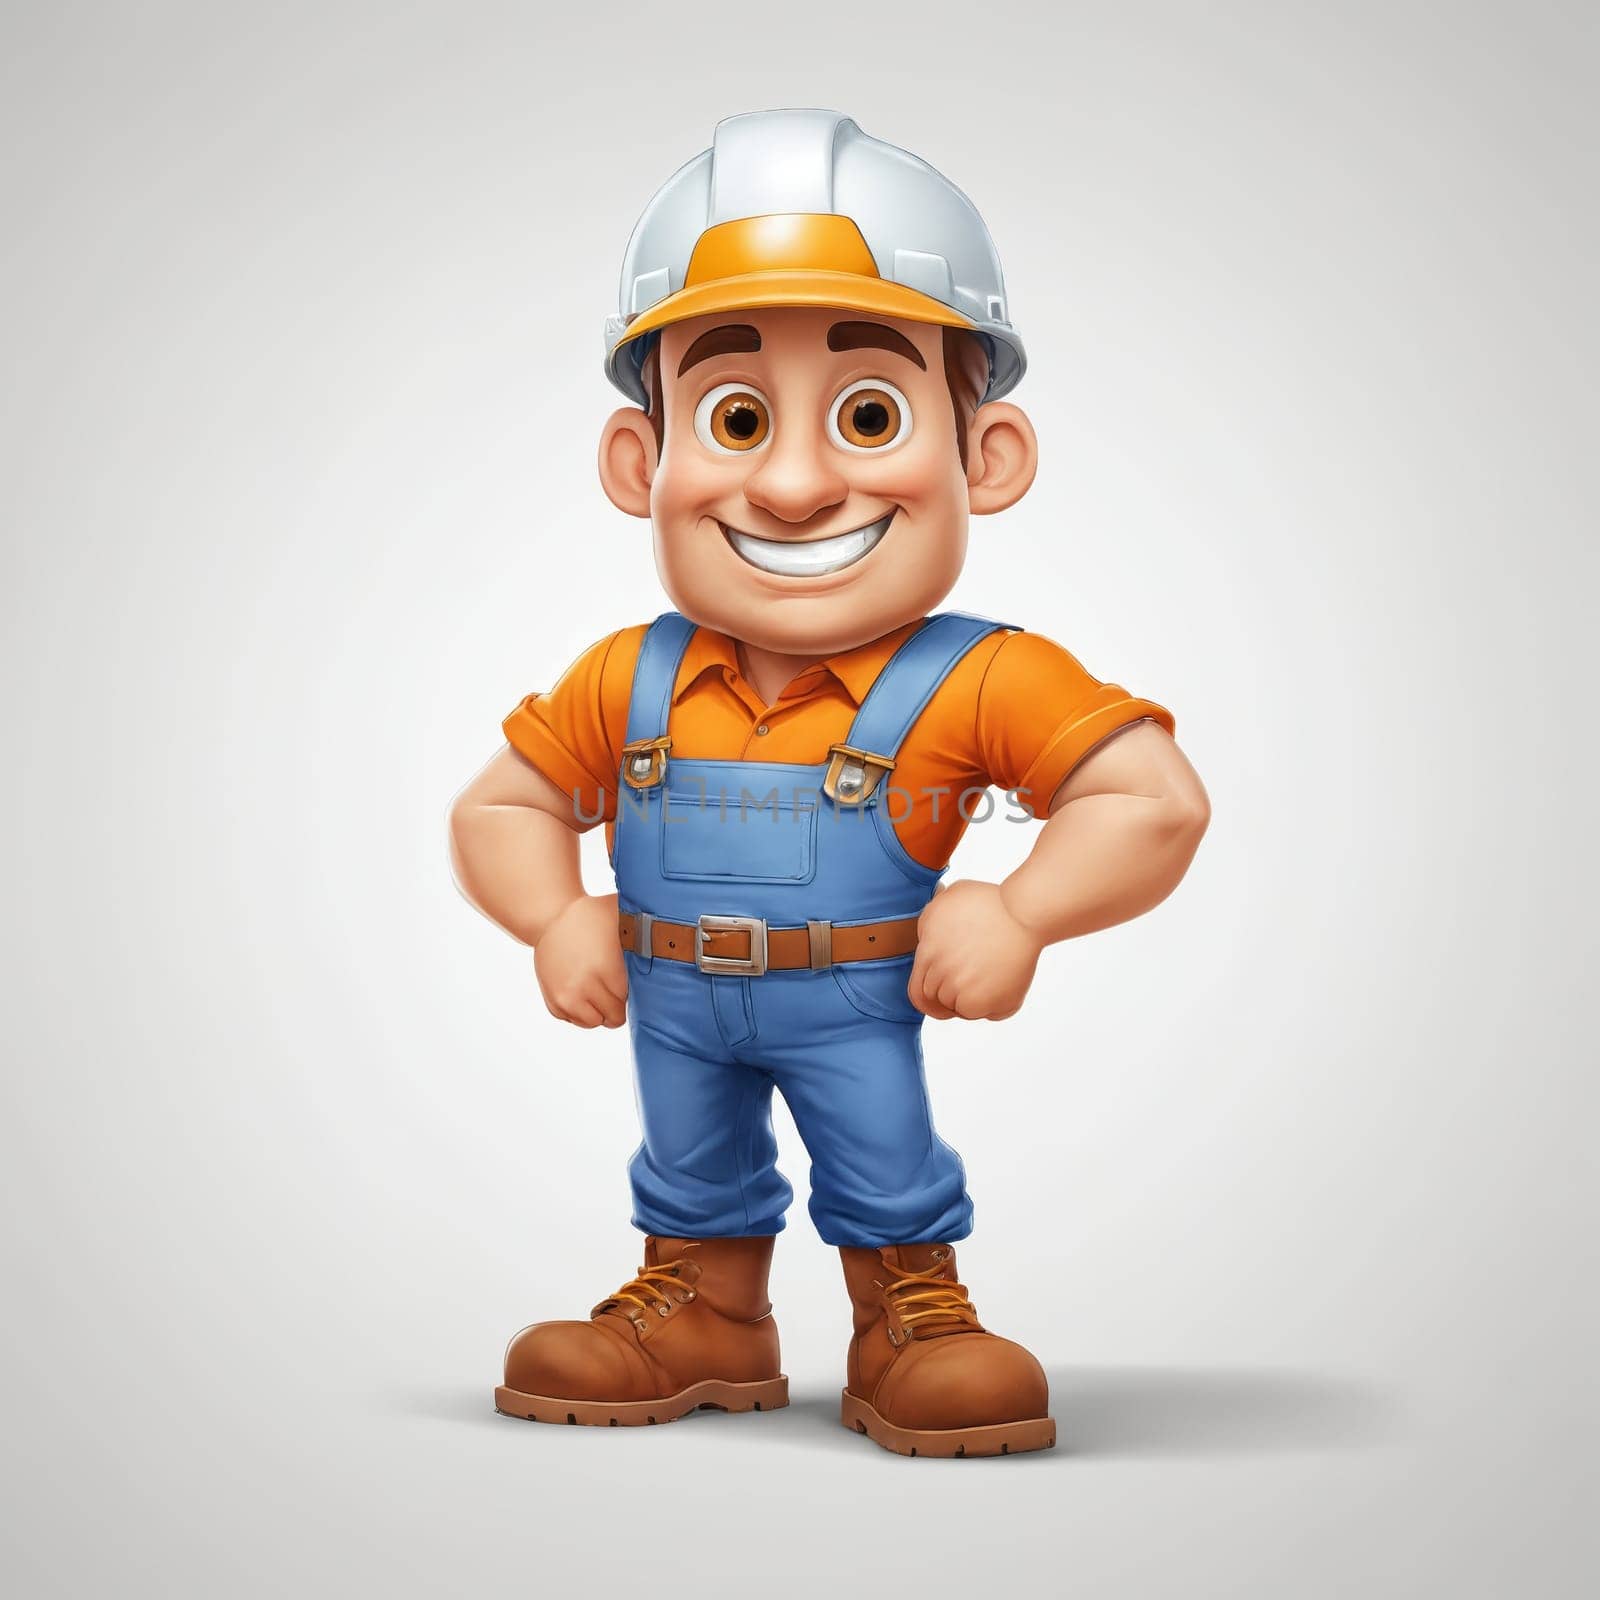 Hardworking Builder: Character with Tools and Yellow Helmet by Andre1ns